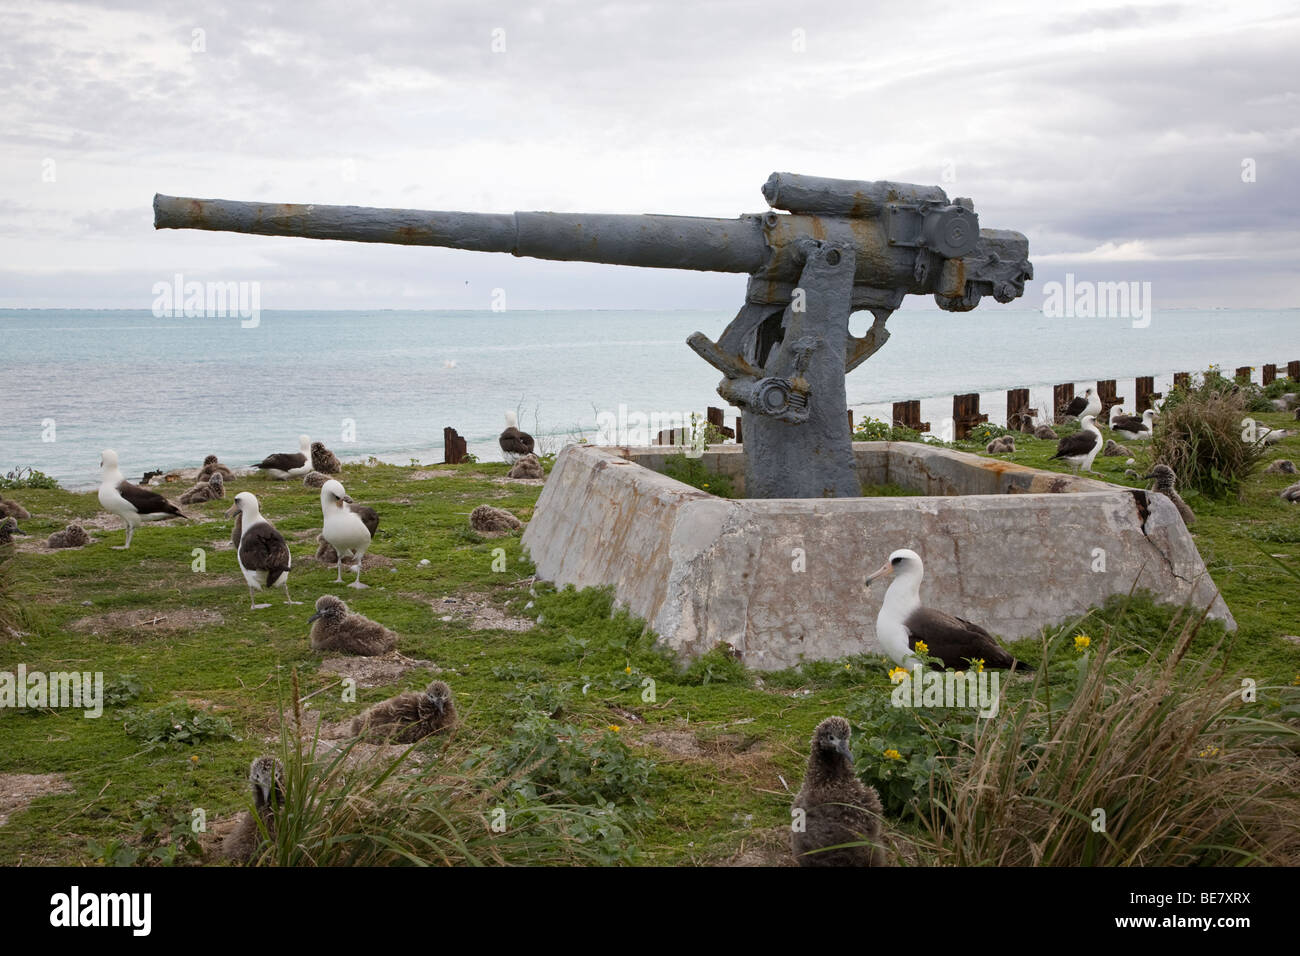 World War II 3' anti-aircraft gun of the naval air station on Midway Atoll from 1942 - 1945 and Laysan Albatrosses on Eastern Island in the Pacific Stock Photo